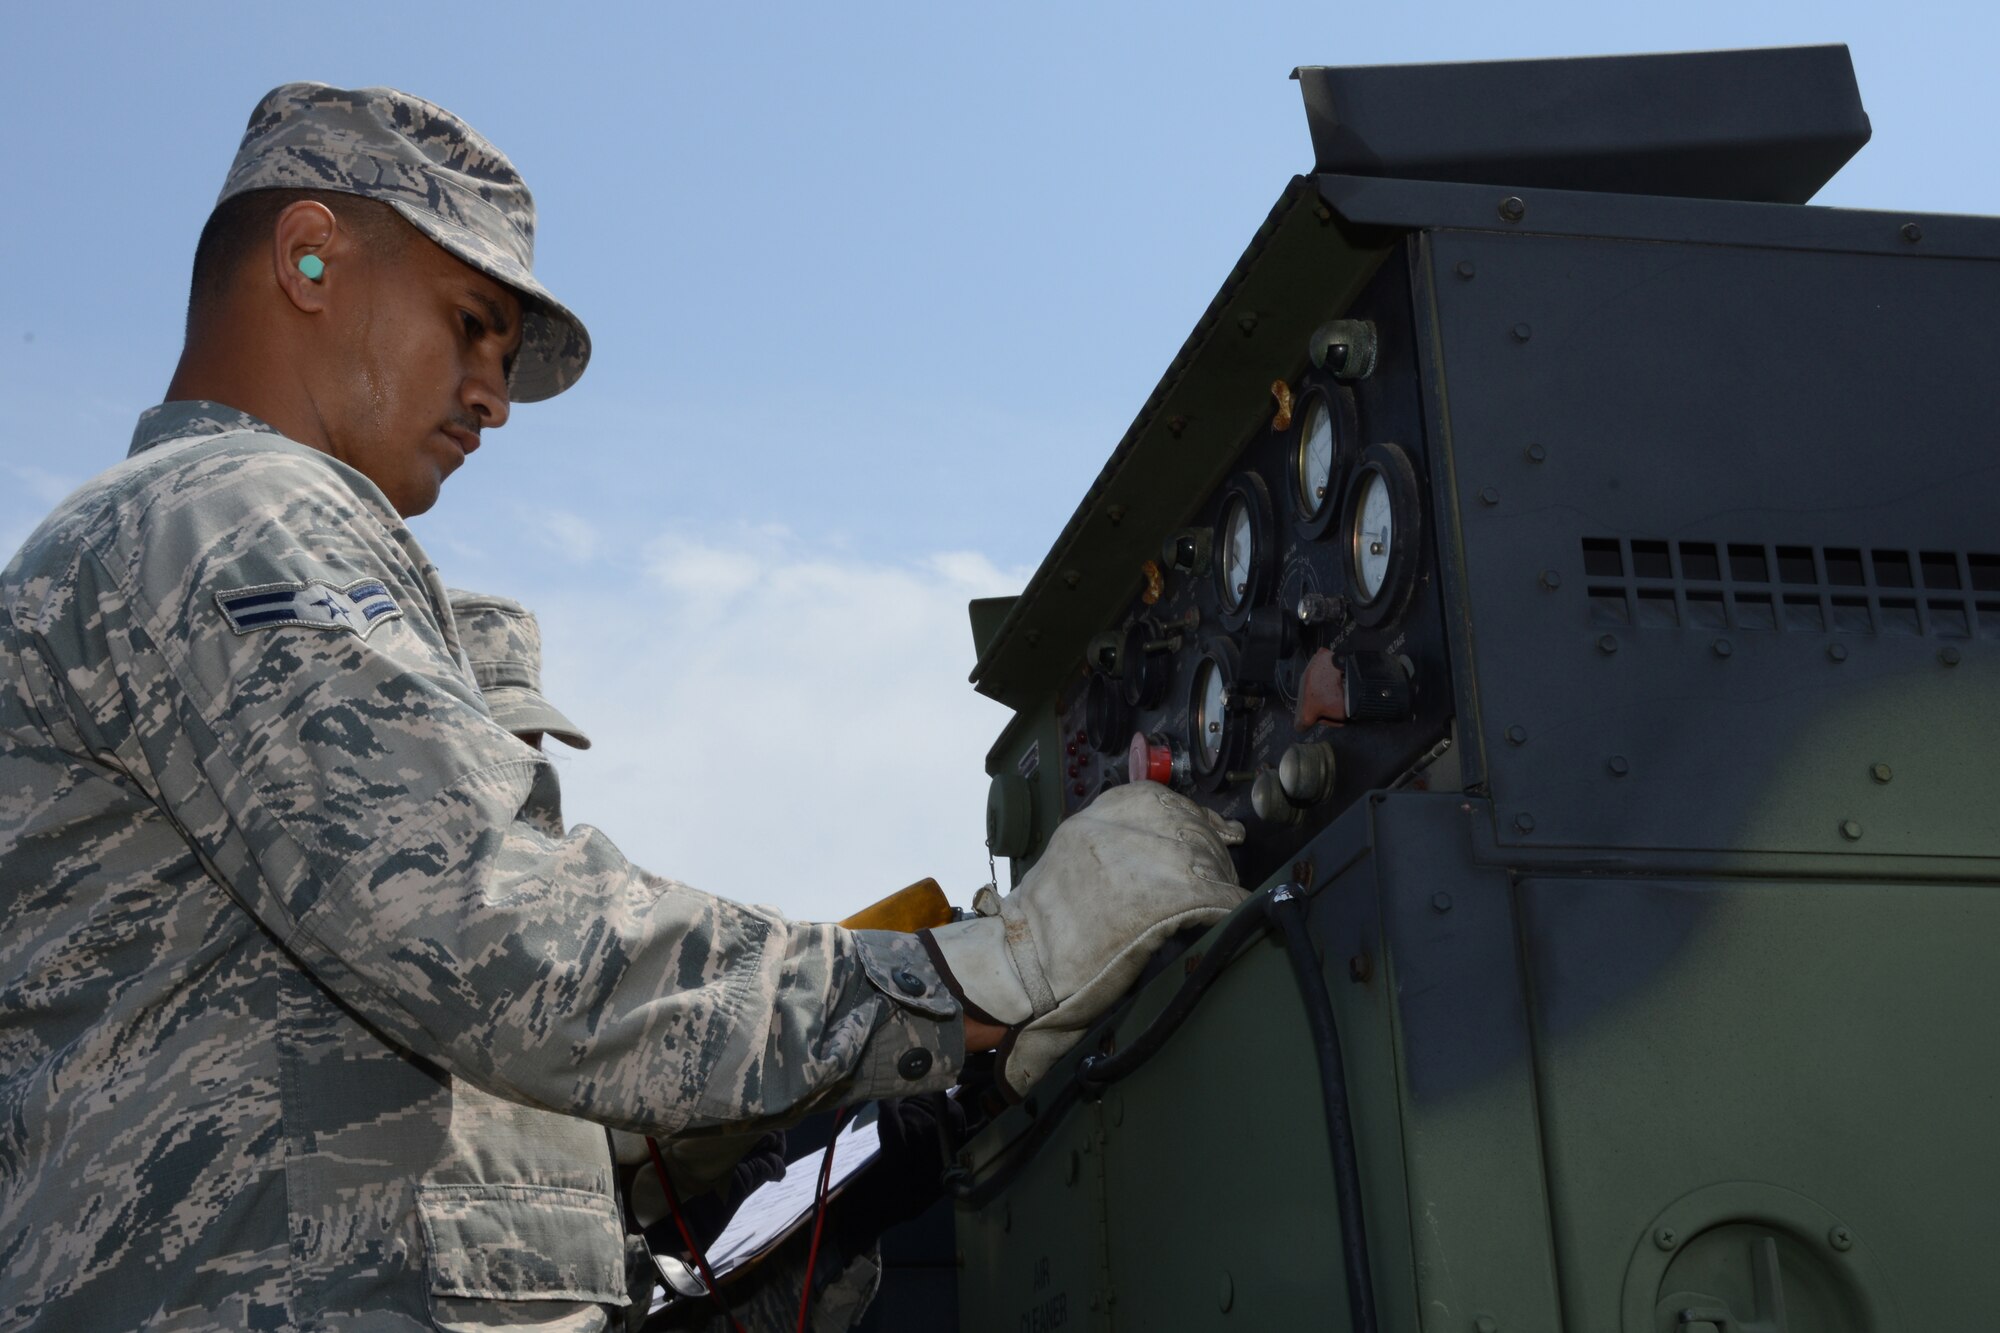 Airman 1st Class Erin Cruz, an aerospace ground equipment technician from the 103rd Air Control Squadron, performs maintenance on one of the generators that supply power to the unit’s tactical site while deployed to the National Guard Training Center, Sea Girt, N.J., June 10.  The unit operated in field conditions using generated power to enable operators to command and control simulated military aircraft from the field. (U.S. Air National Guard photo by Senior Airman Emmanuel Santiago) 